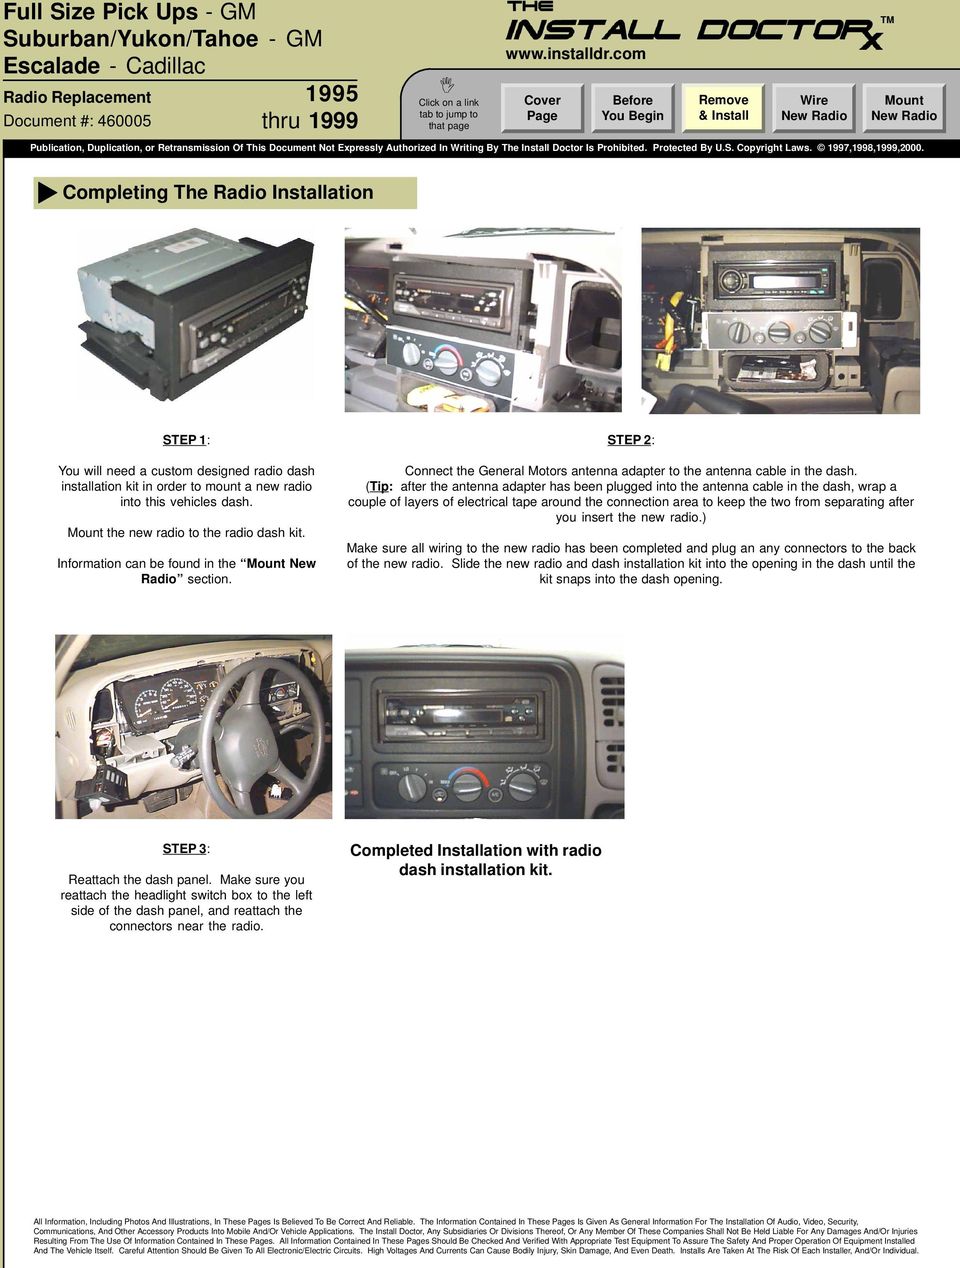 nformation can be found in the New Radio section. STEP 2: Connect the General Motors antenna adapter to the antenna cable in the dash.